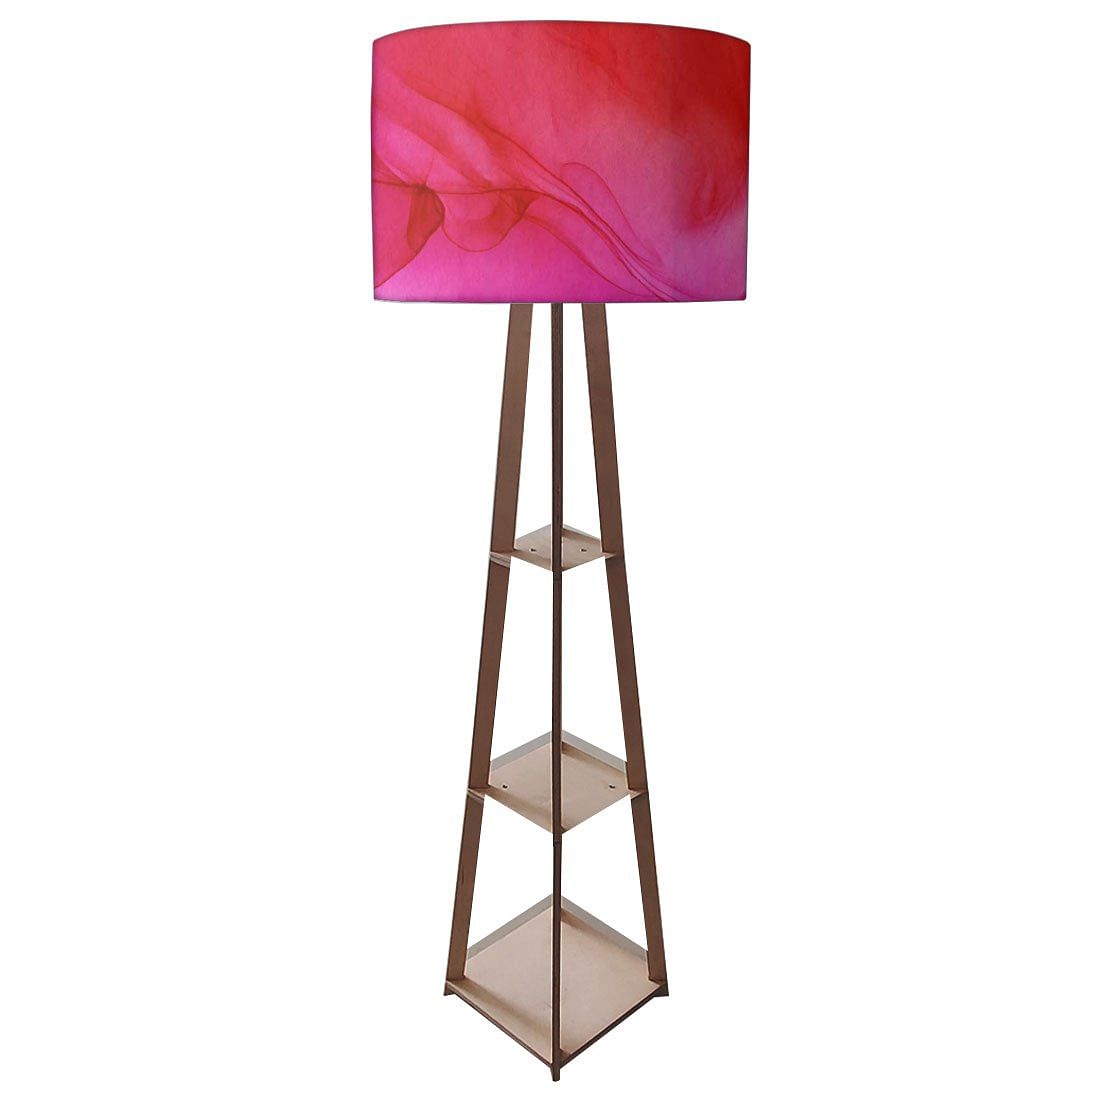 Floor Lamps for Home Decoration Night Light - Watercolor Nutcase